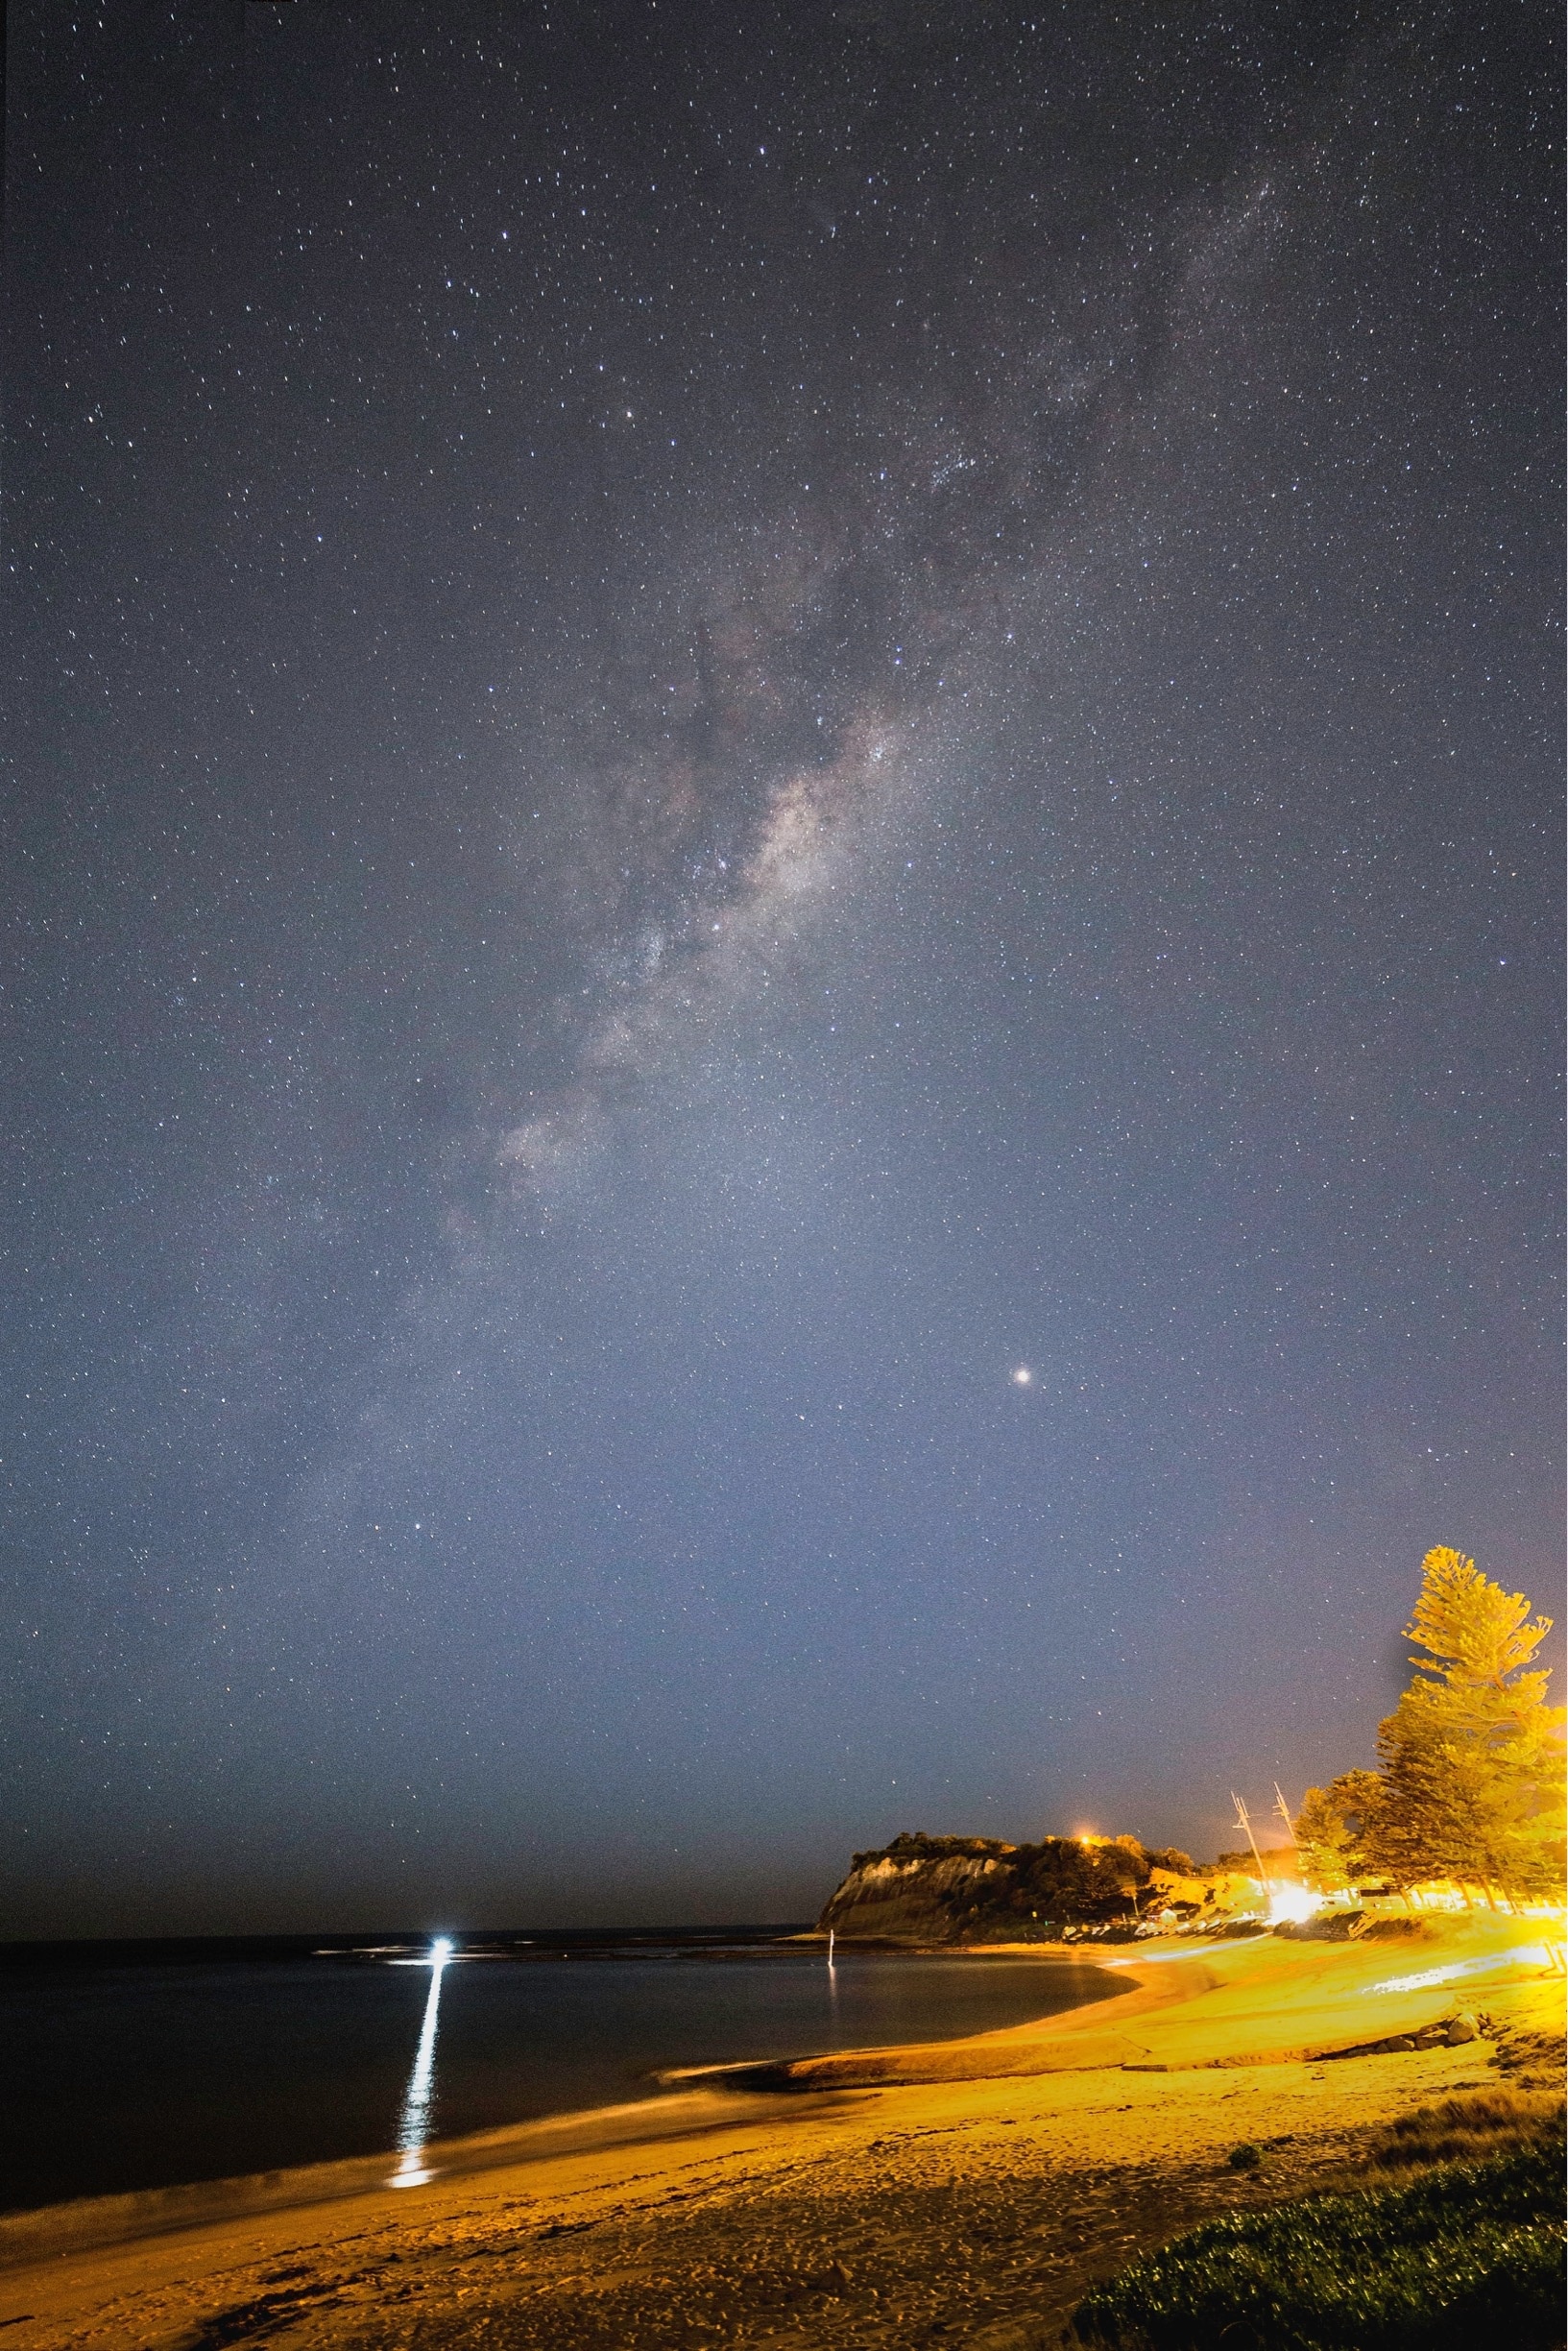 Milky Way & Mars rising. Taken at Long Reef on Sydney’s Northern Beaches. 